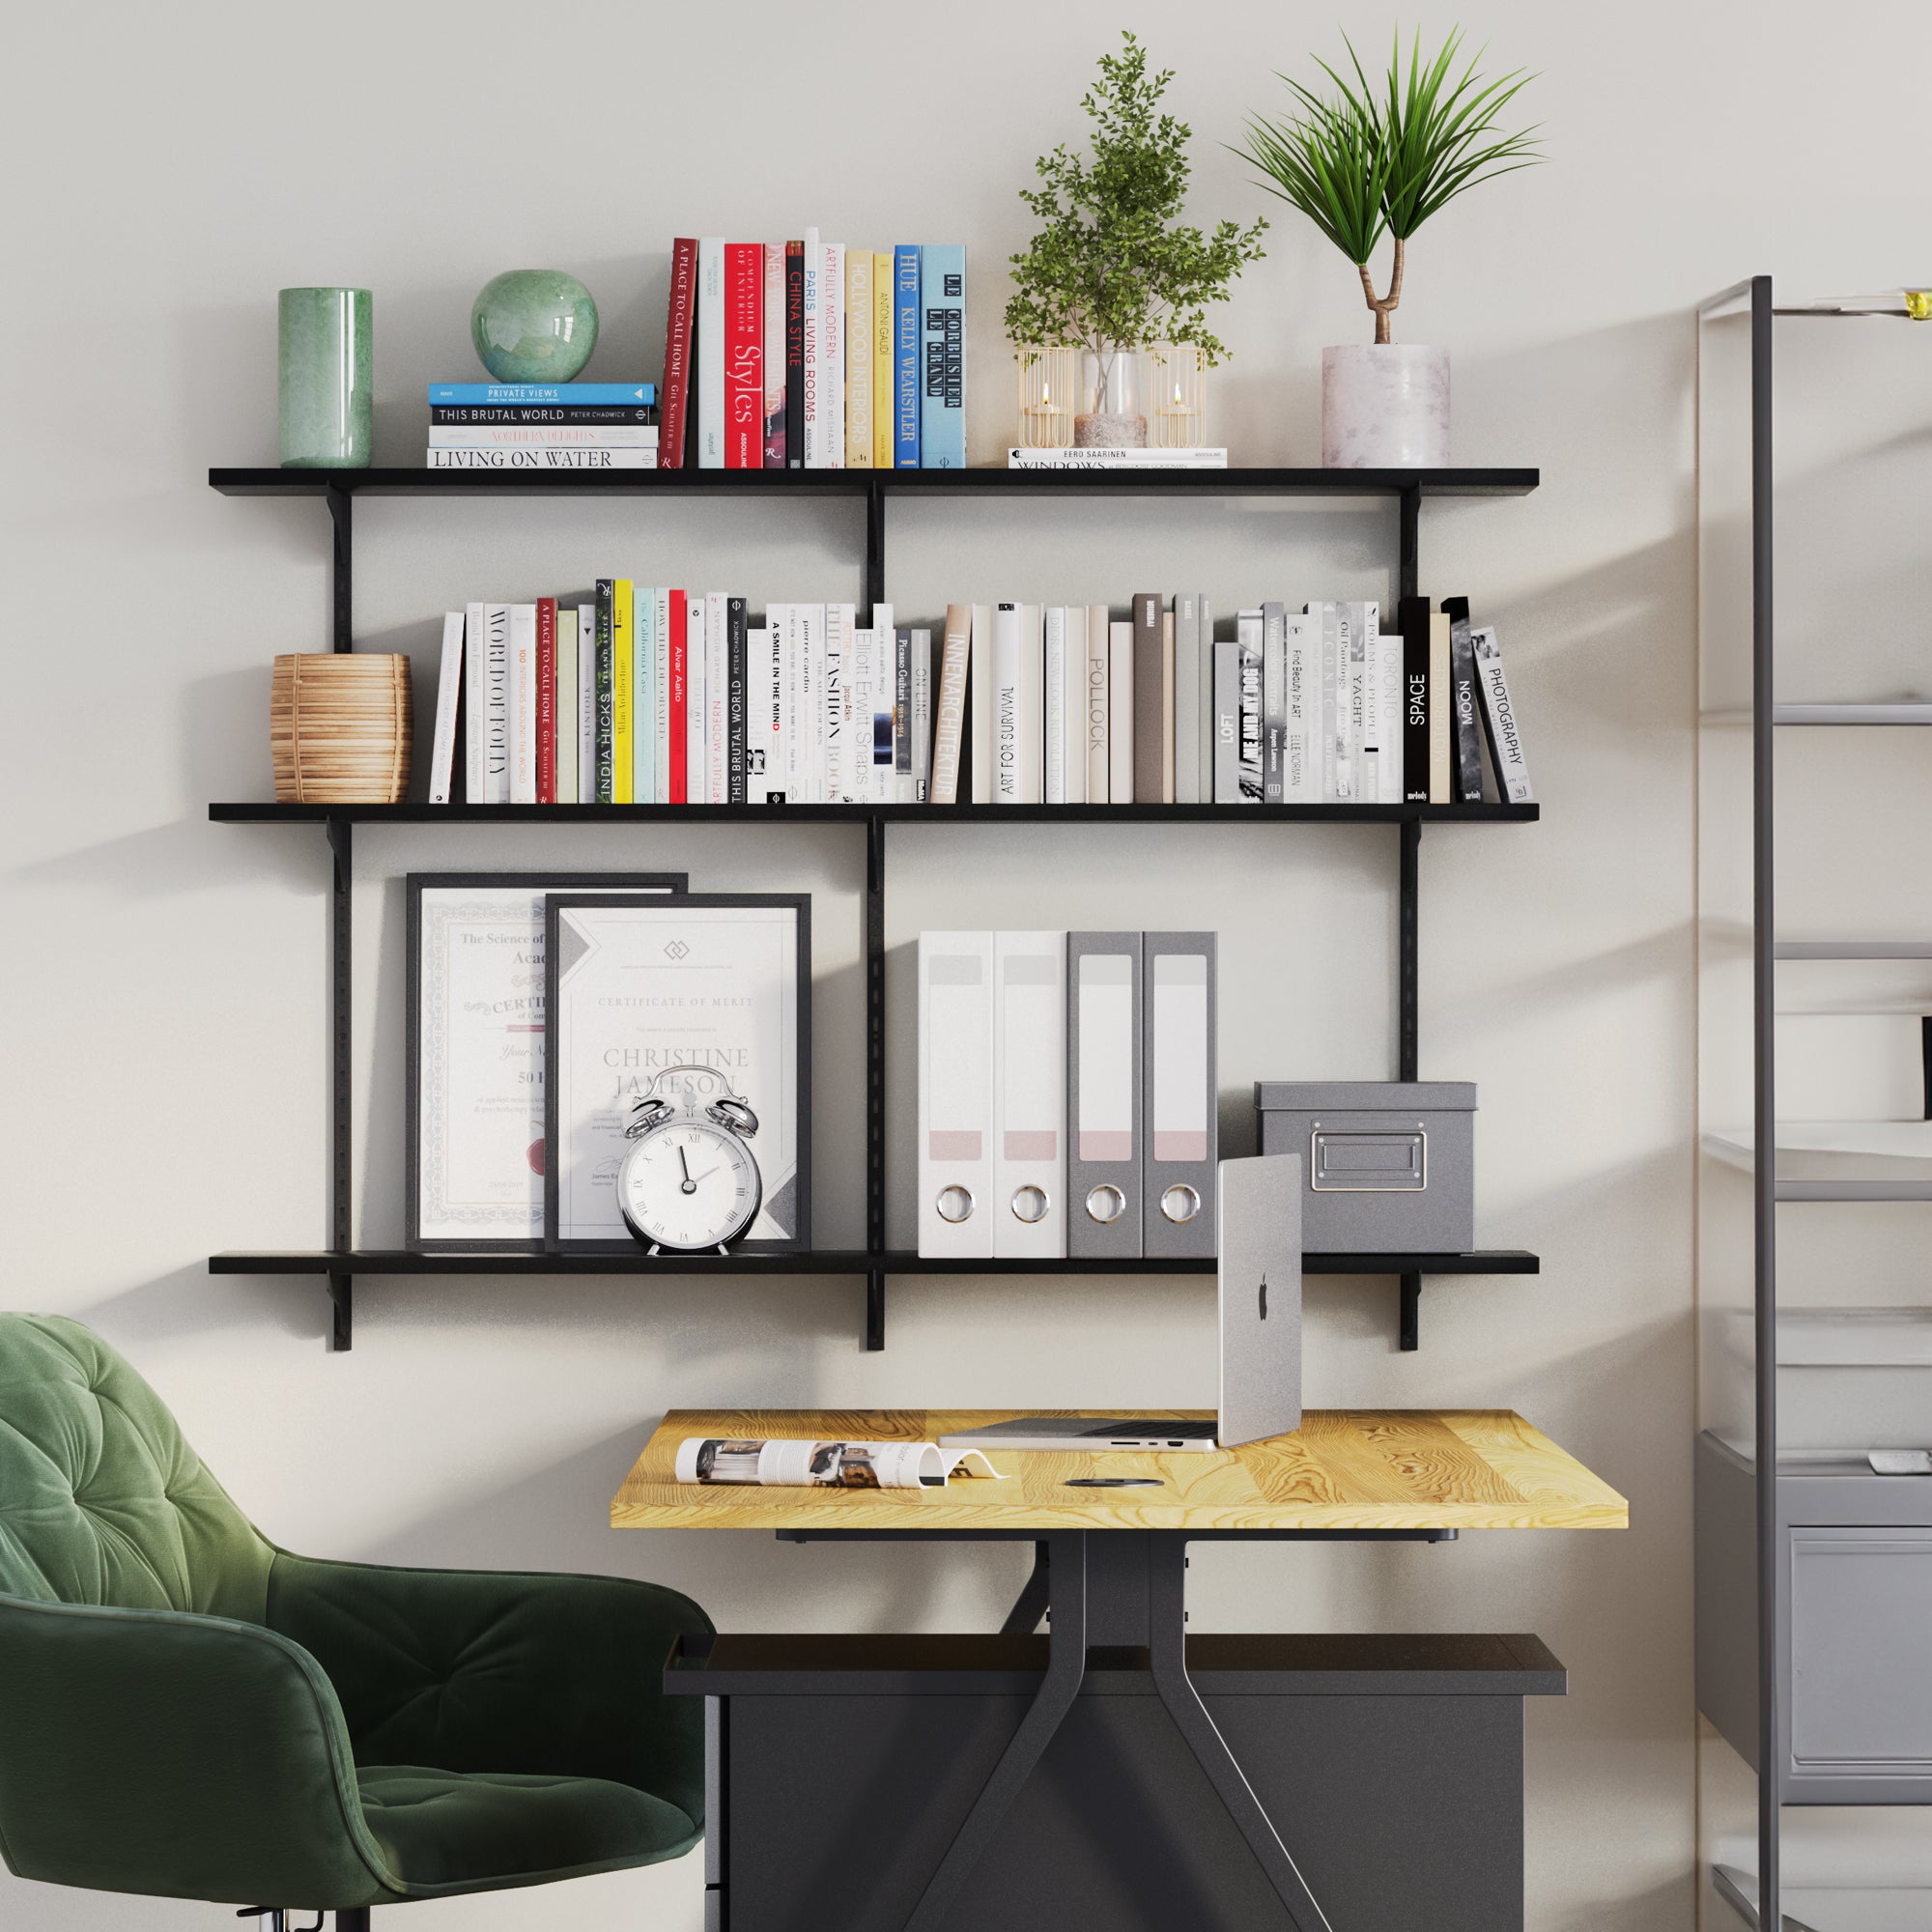 An organized home office setup with 3 tier wall shelf holding books, plants, and stylish desk accessories.